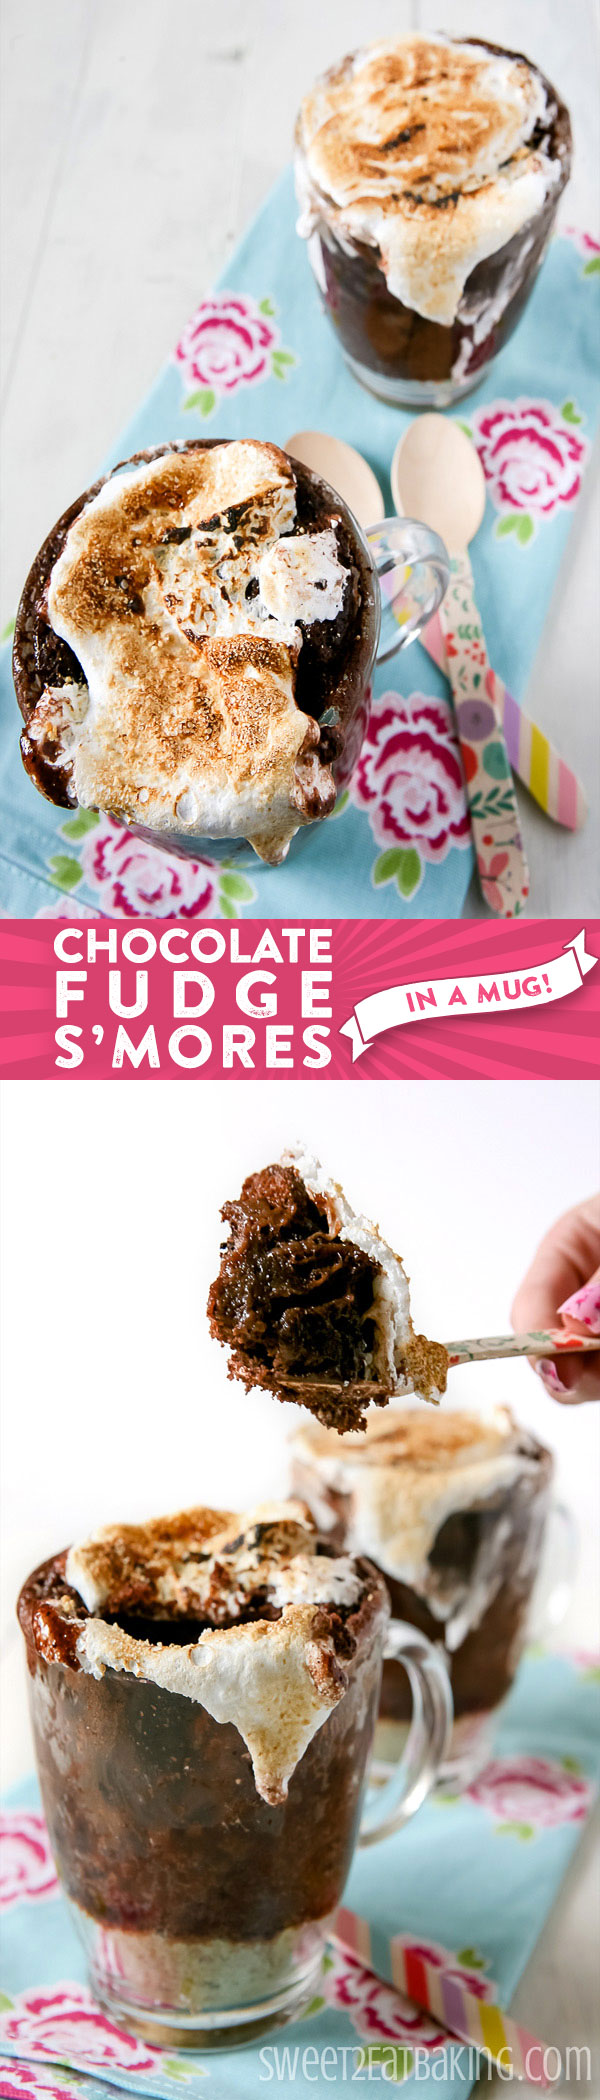 Gooey Chocolate Fudge S'mores Mug Cake Recipe by Sweet2EatBaking.com | A layer of graham cracker crumbs (digestive biscuits), smothered in a gooey moist chocolate cake, then topped off with ooey gooey roasted marshmallow fluff!